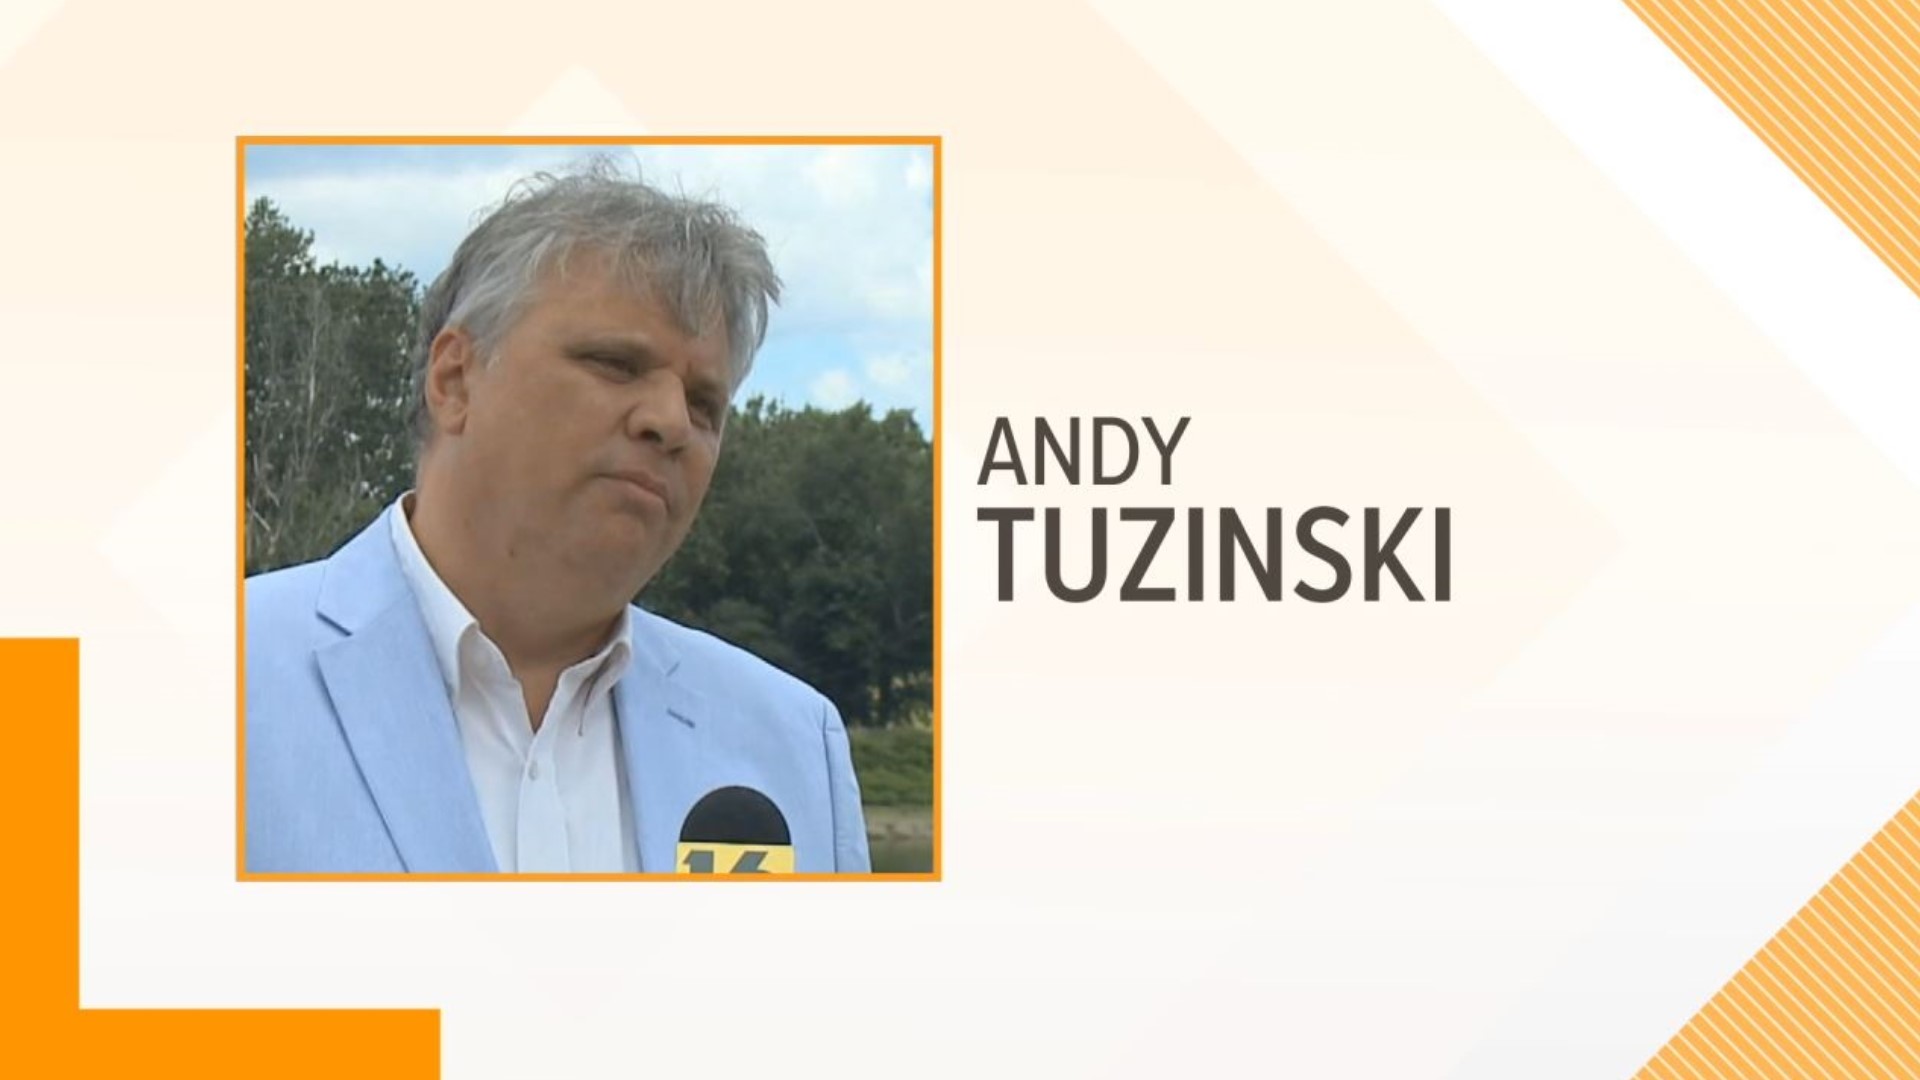 Forty Fort Mayor Andy Tuzinski announced Sunday night on Facebook that he is resigning.